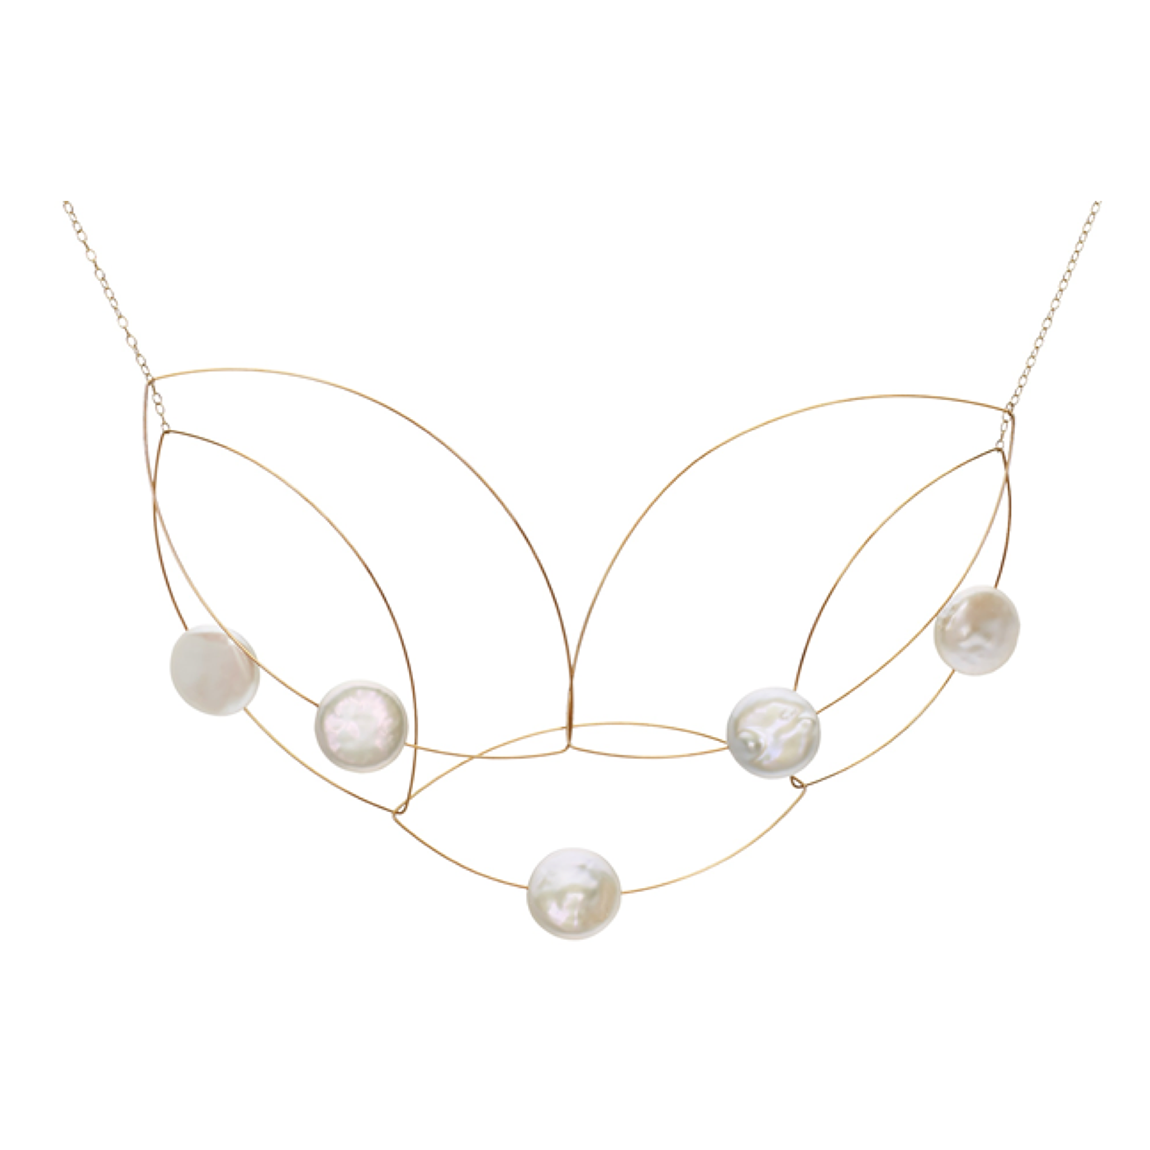 Statement Articulated Necklace with Freshwater Pearls